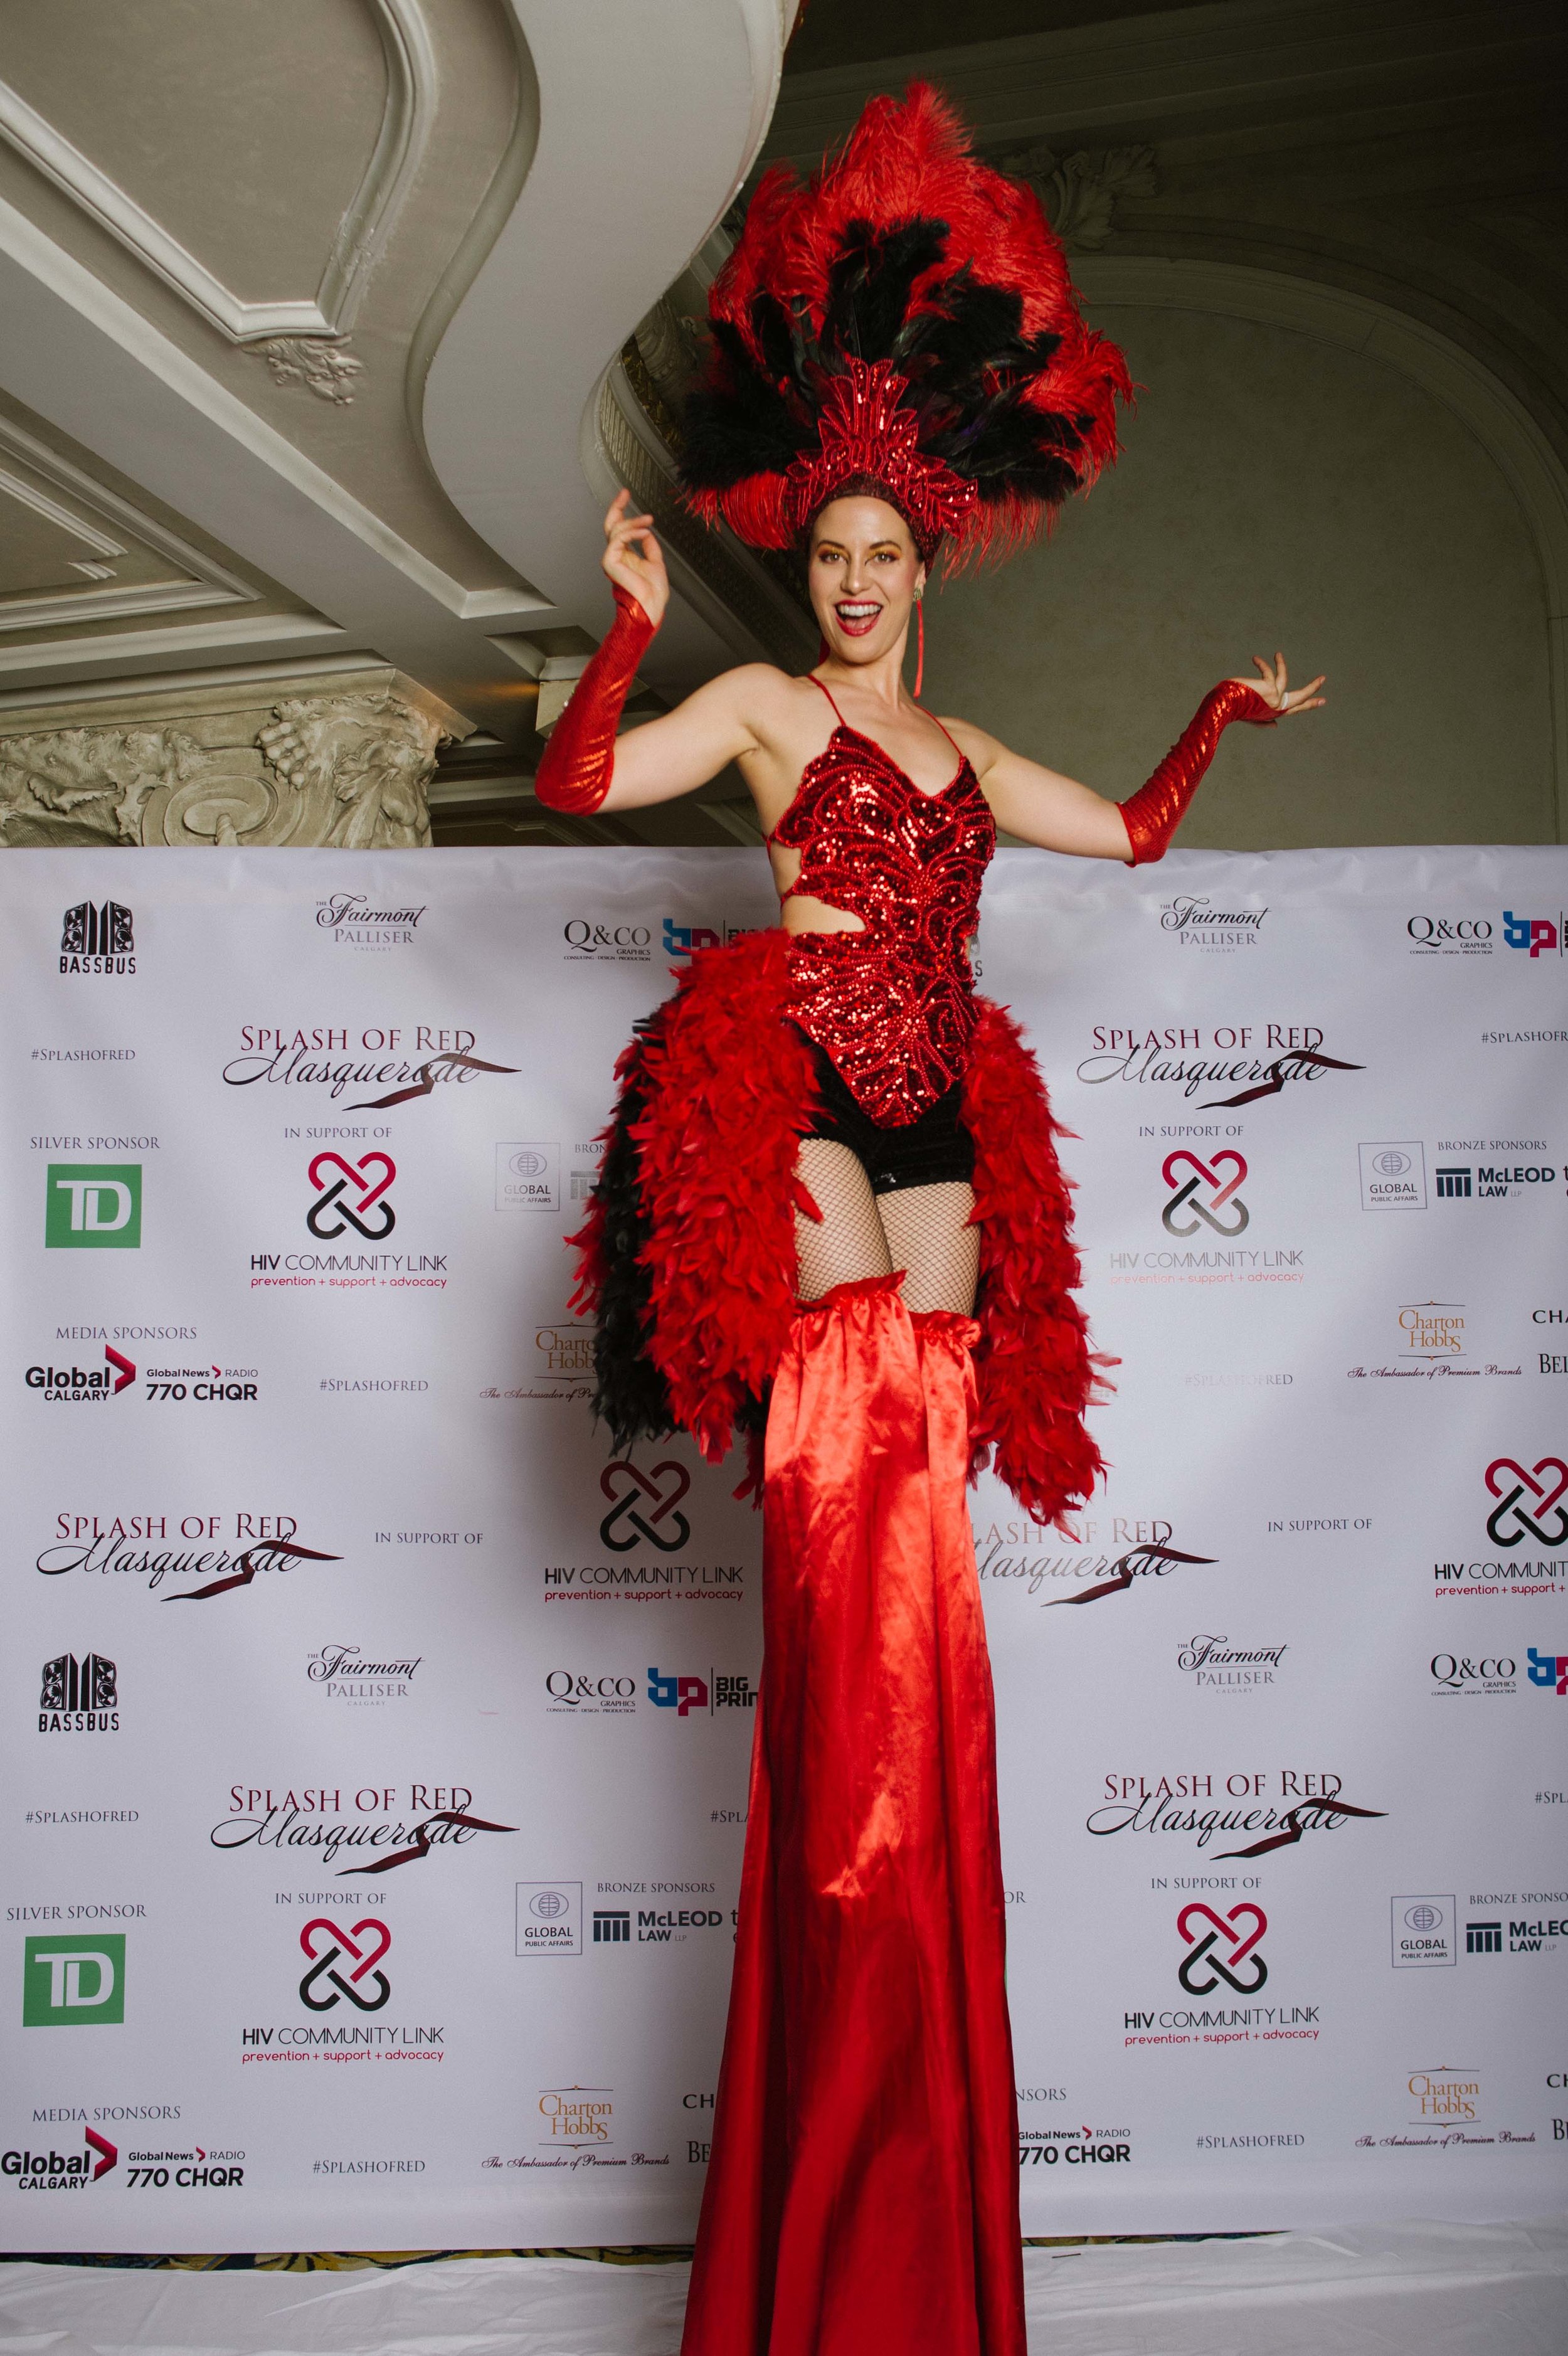 Christy-D-Swanberg-Photography-Calgary-Commercial-Corporate-Events-Splash-of-Red-Community-HIV-Link-13.jpg